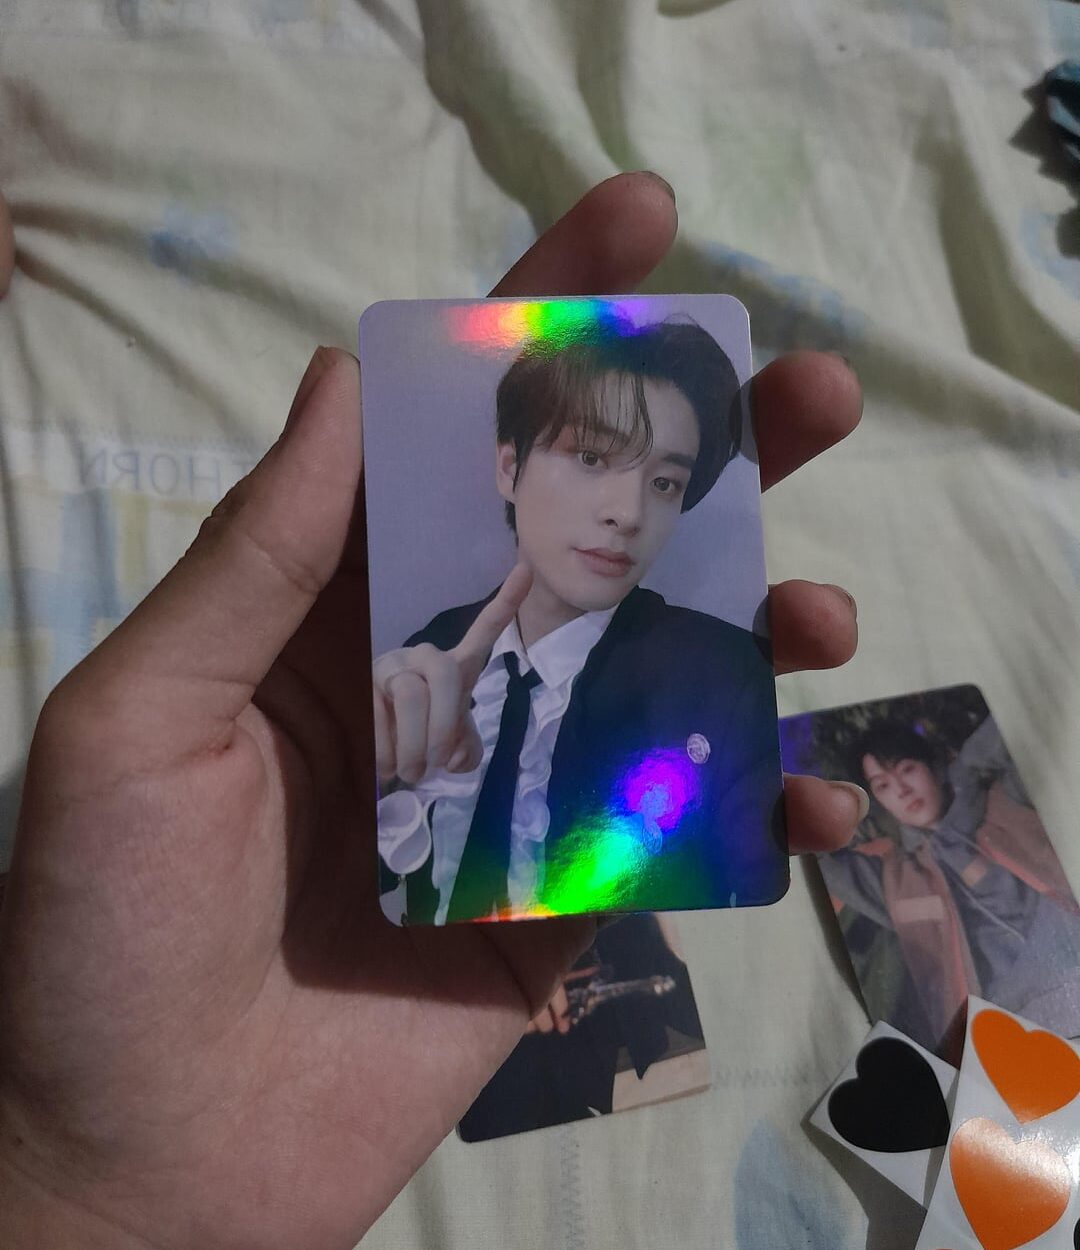 ARE THESE OFFICIAL PHOTOCARDS?